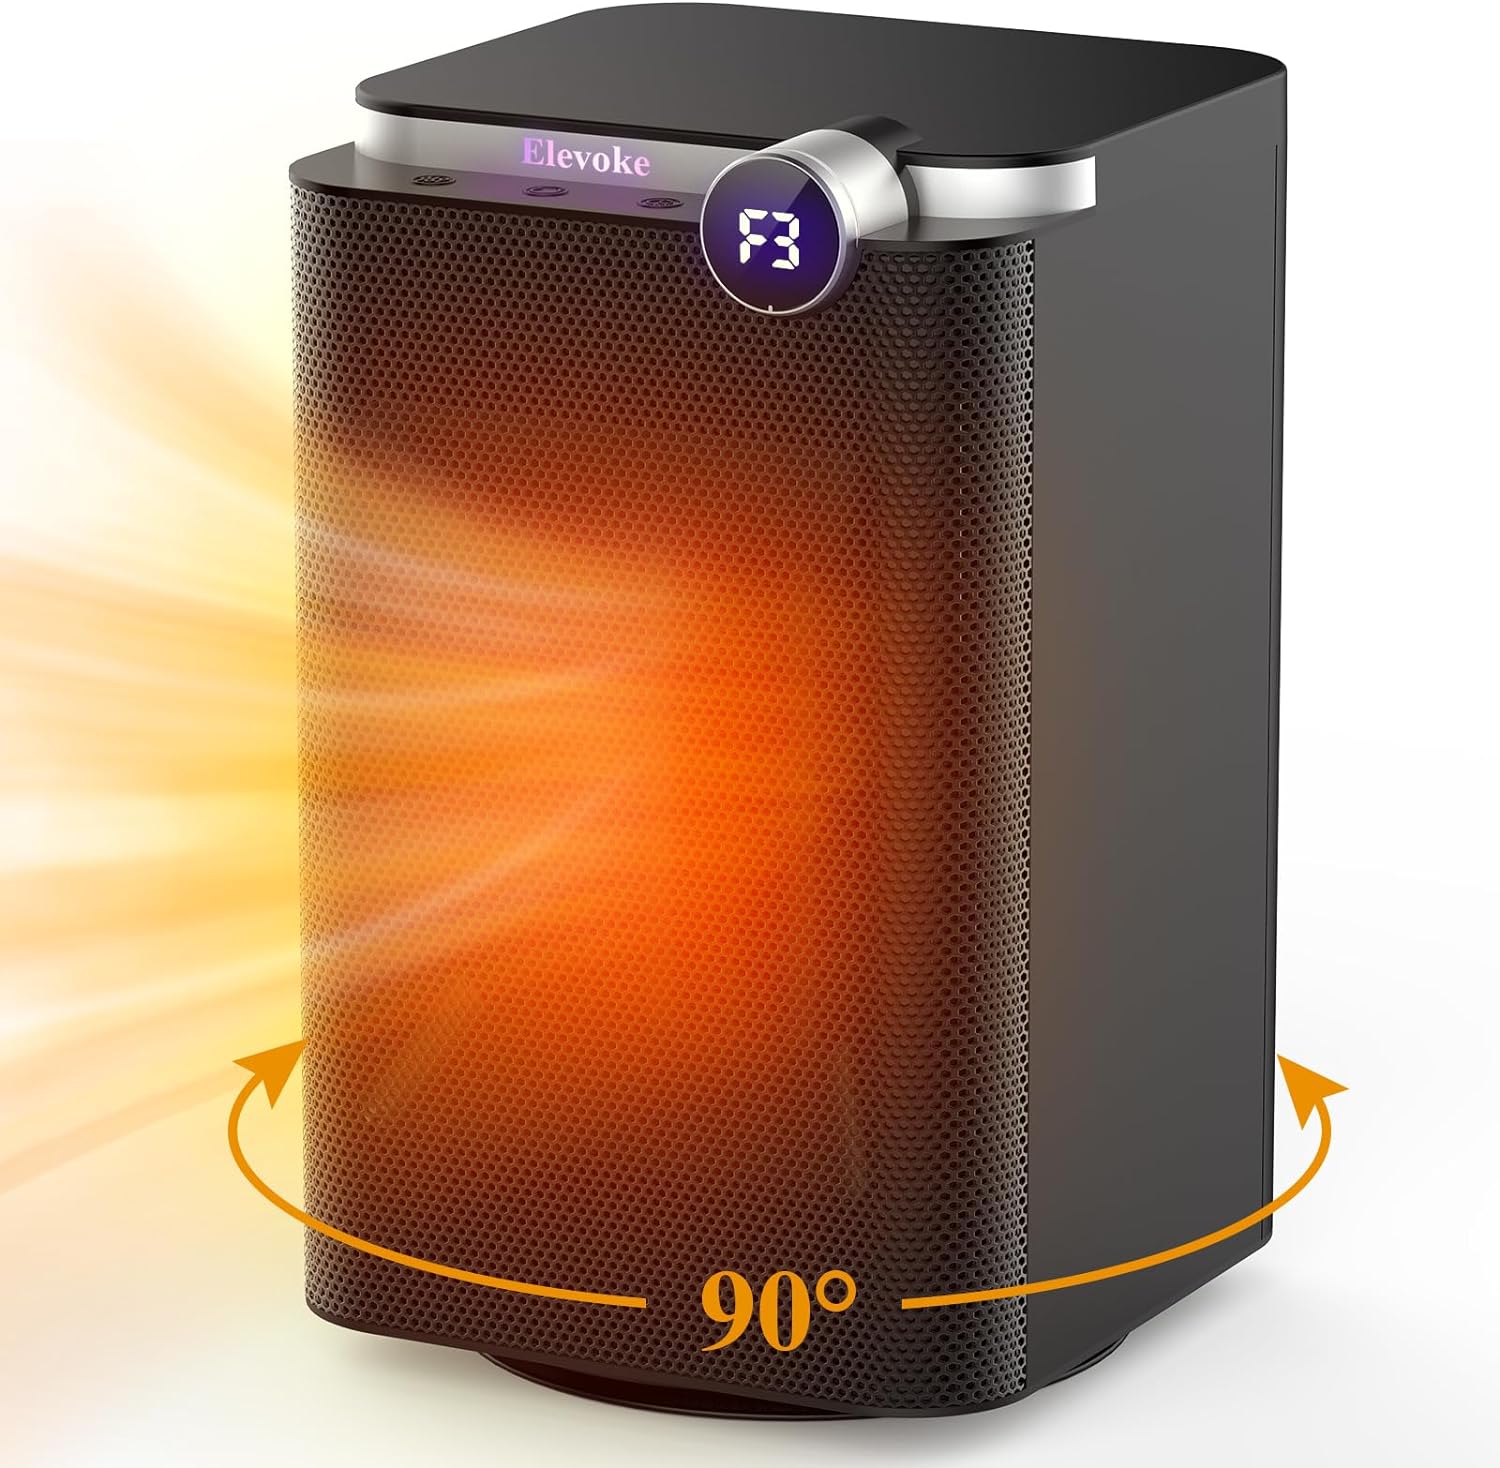 Limited-Time Promo: Elevoke Space Heater - Snag Your Discount Today!